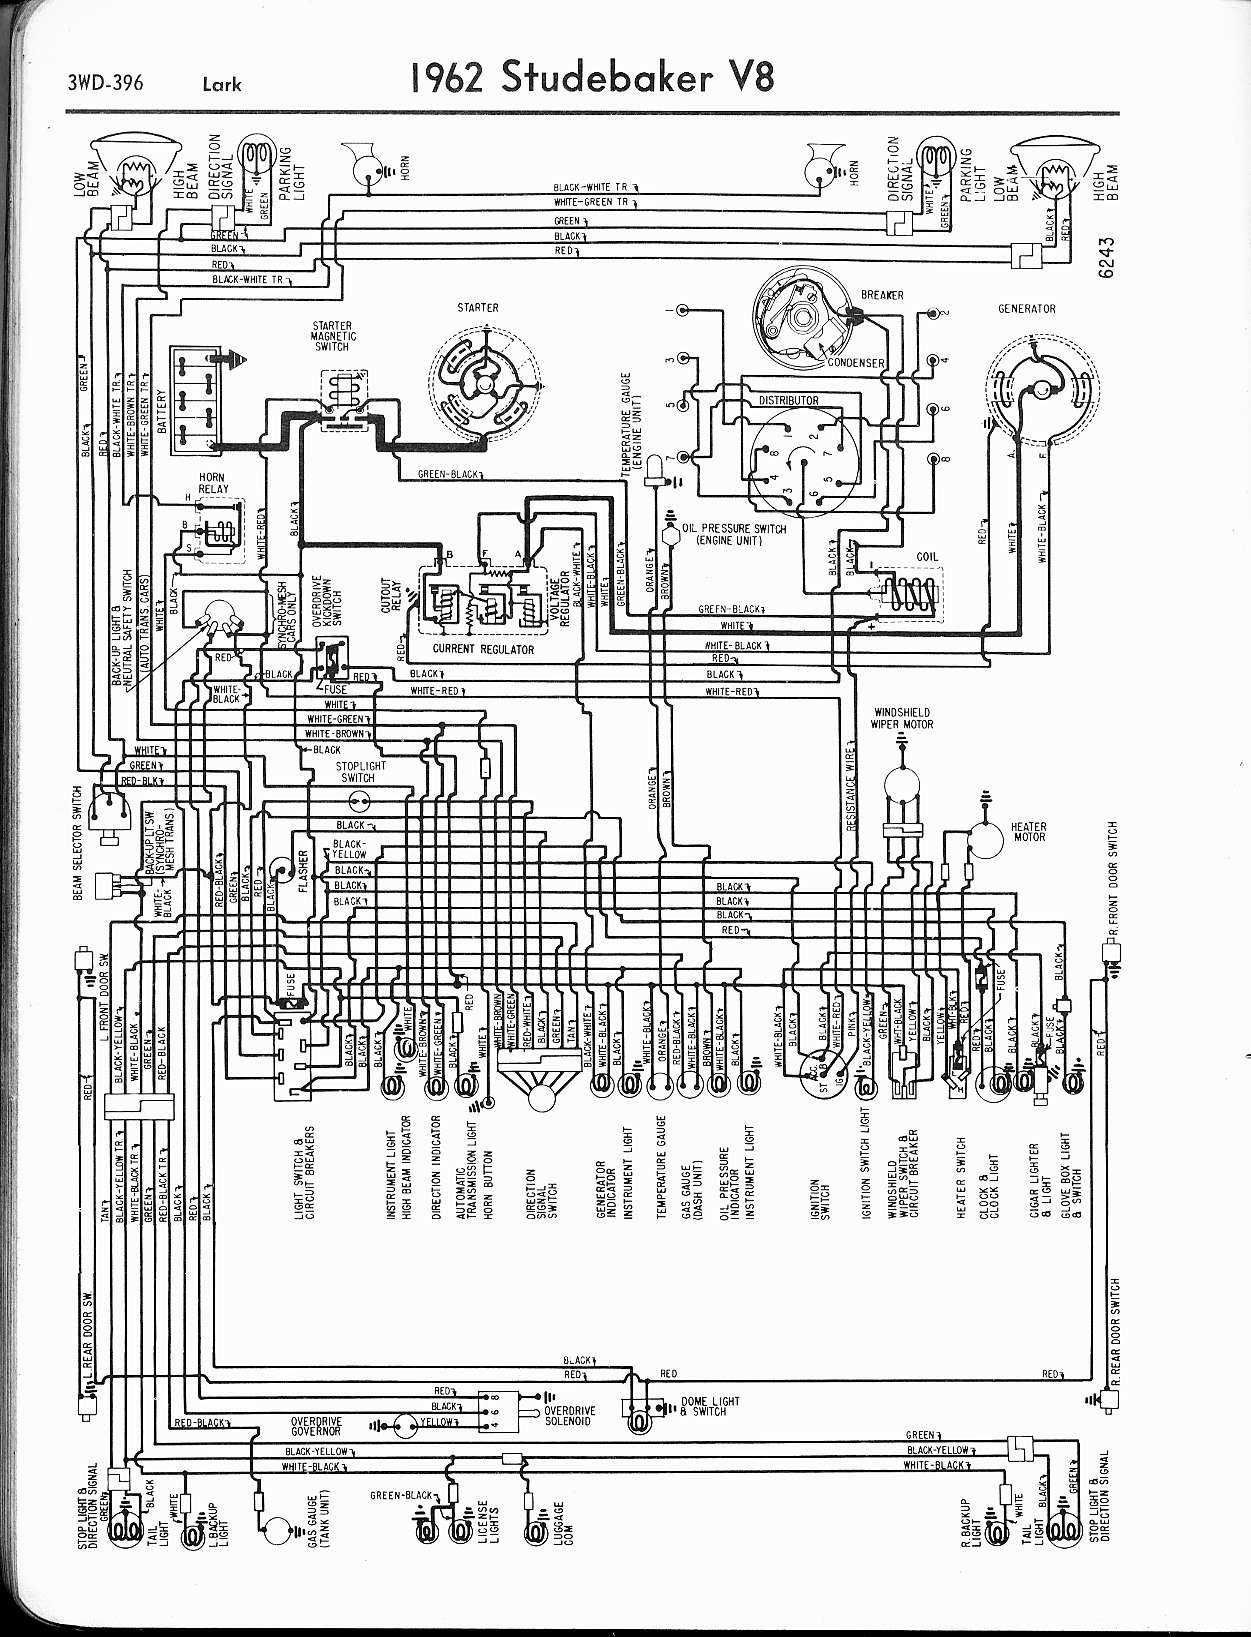 Studebaker Wiring Diagrams The Old Car Manual Project